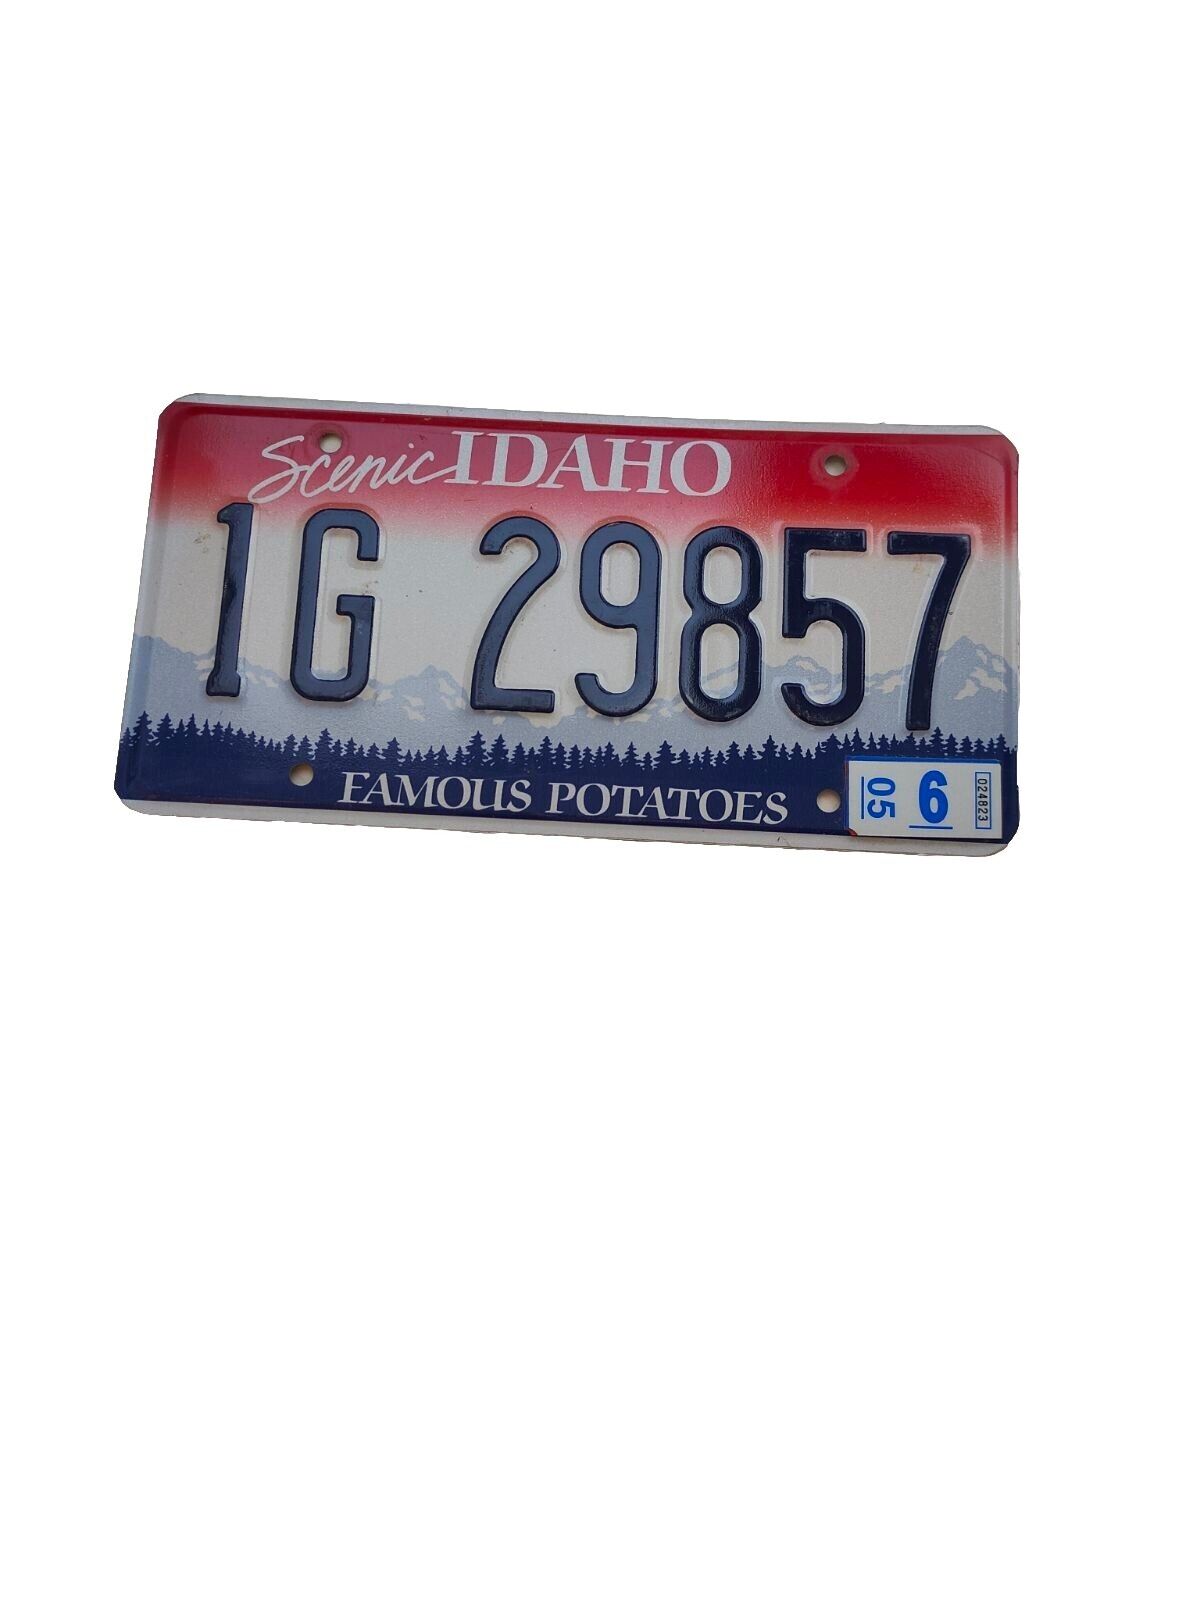 2005 Scenic Idaho License Plate Gem County Famous Potatoes # 1G 29857 Man Cave 